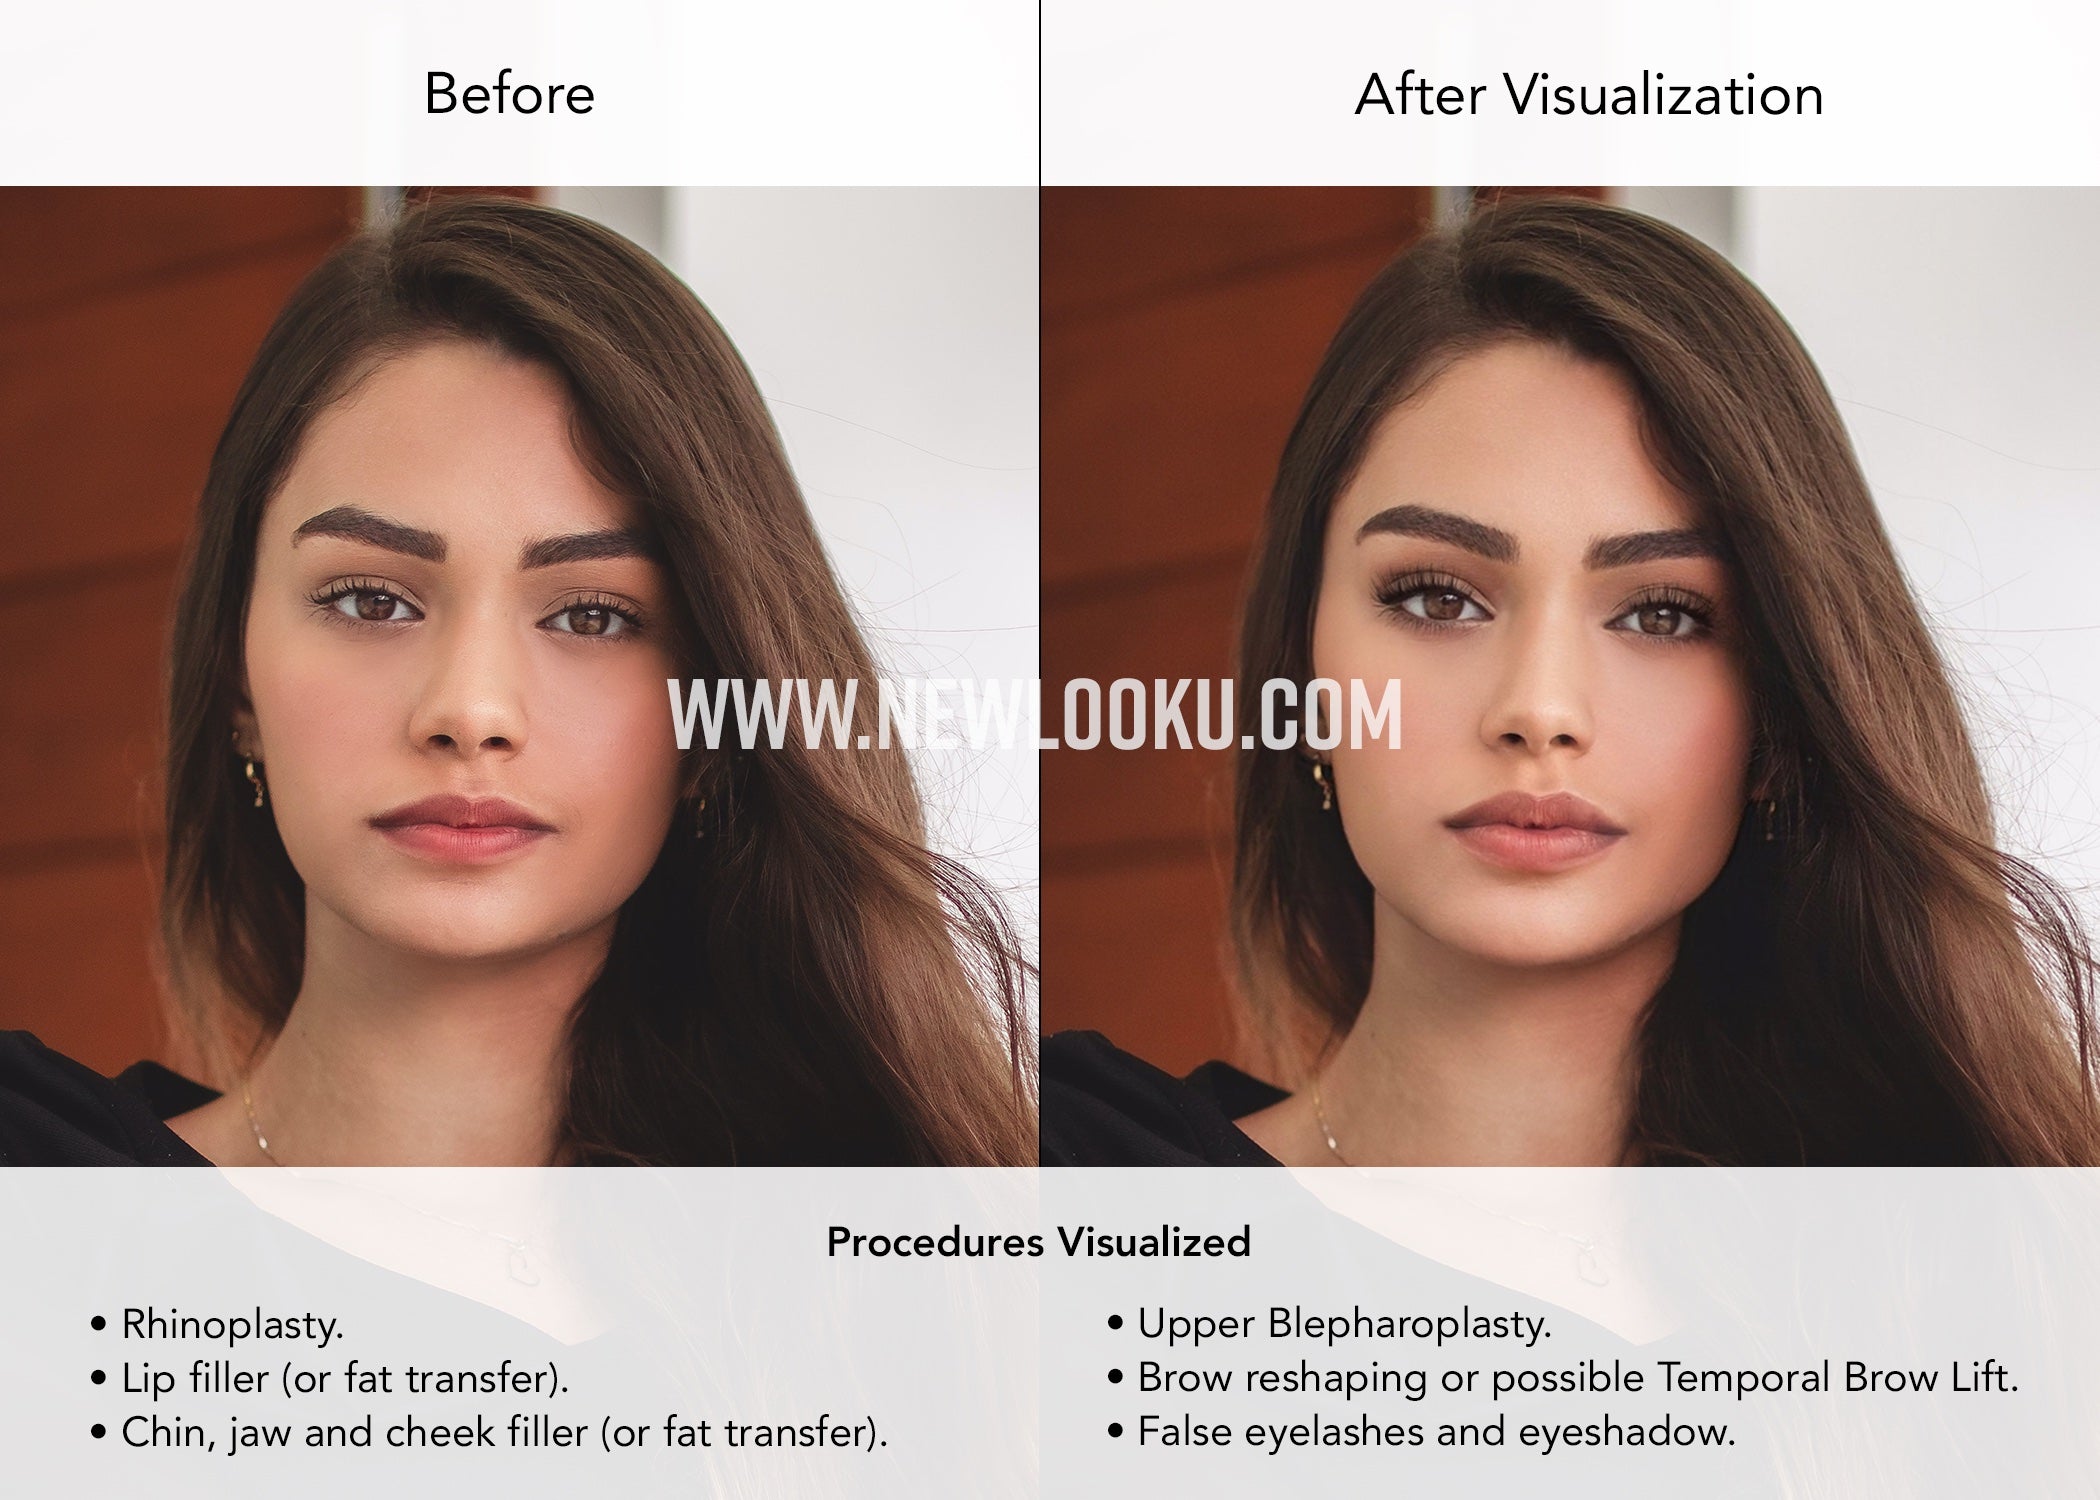 Female Plastic Surgery Visualization Before and After: Rhinoplasty. Lip, chin, jaw and cheek filler (or fat transfer). Upper Blepharoplasty. Brow reshaping or possible Temporal Brow Lift.